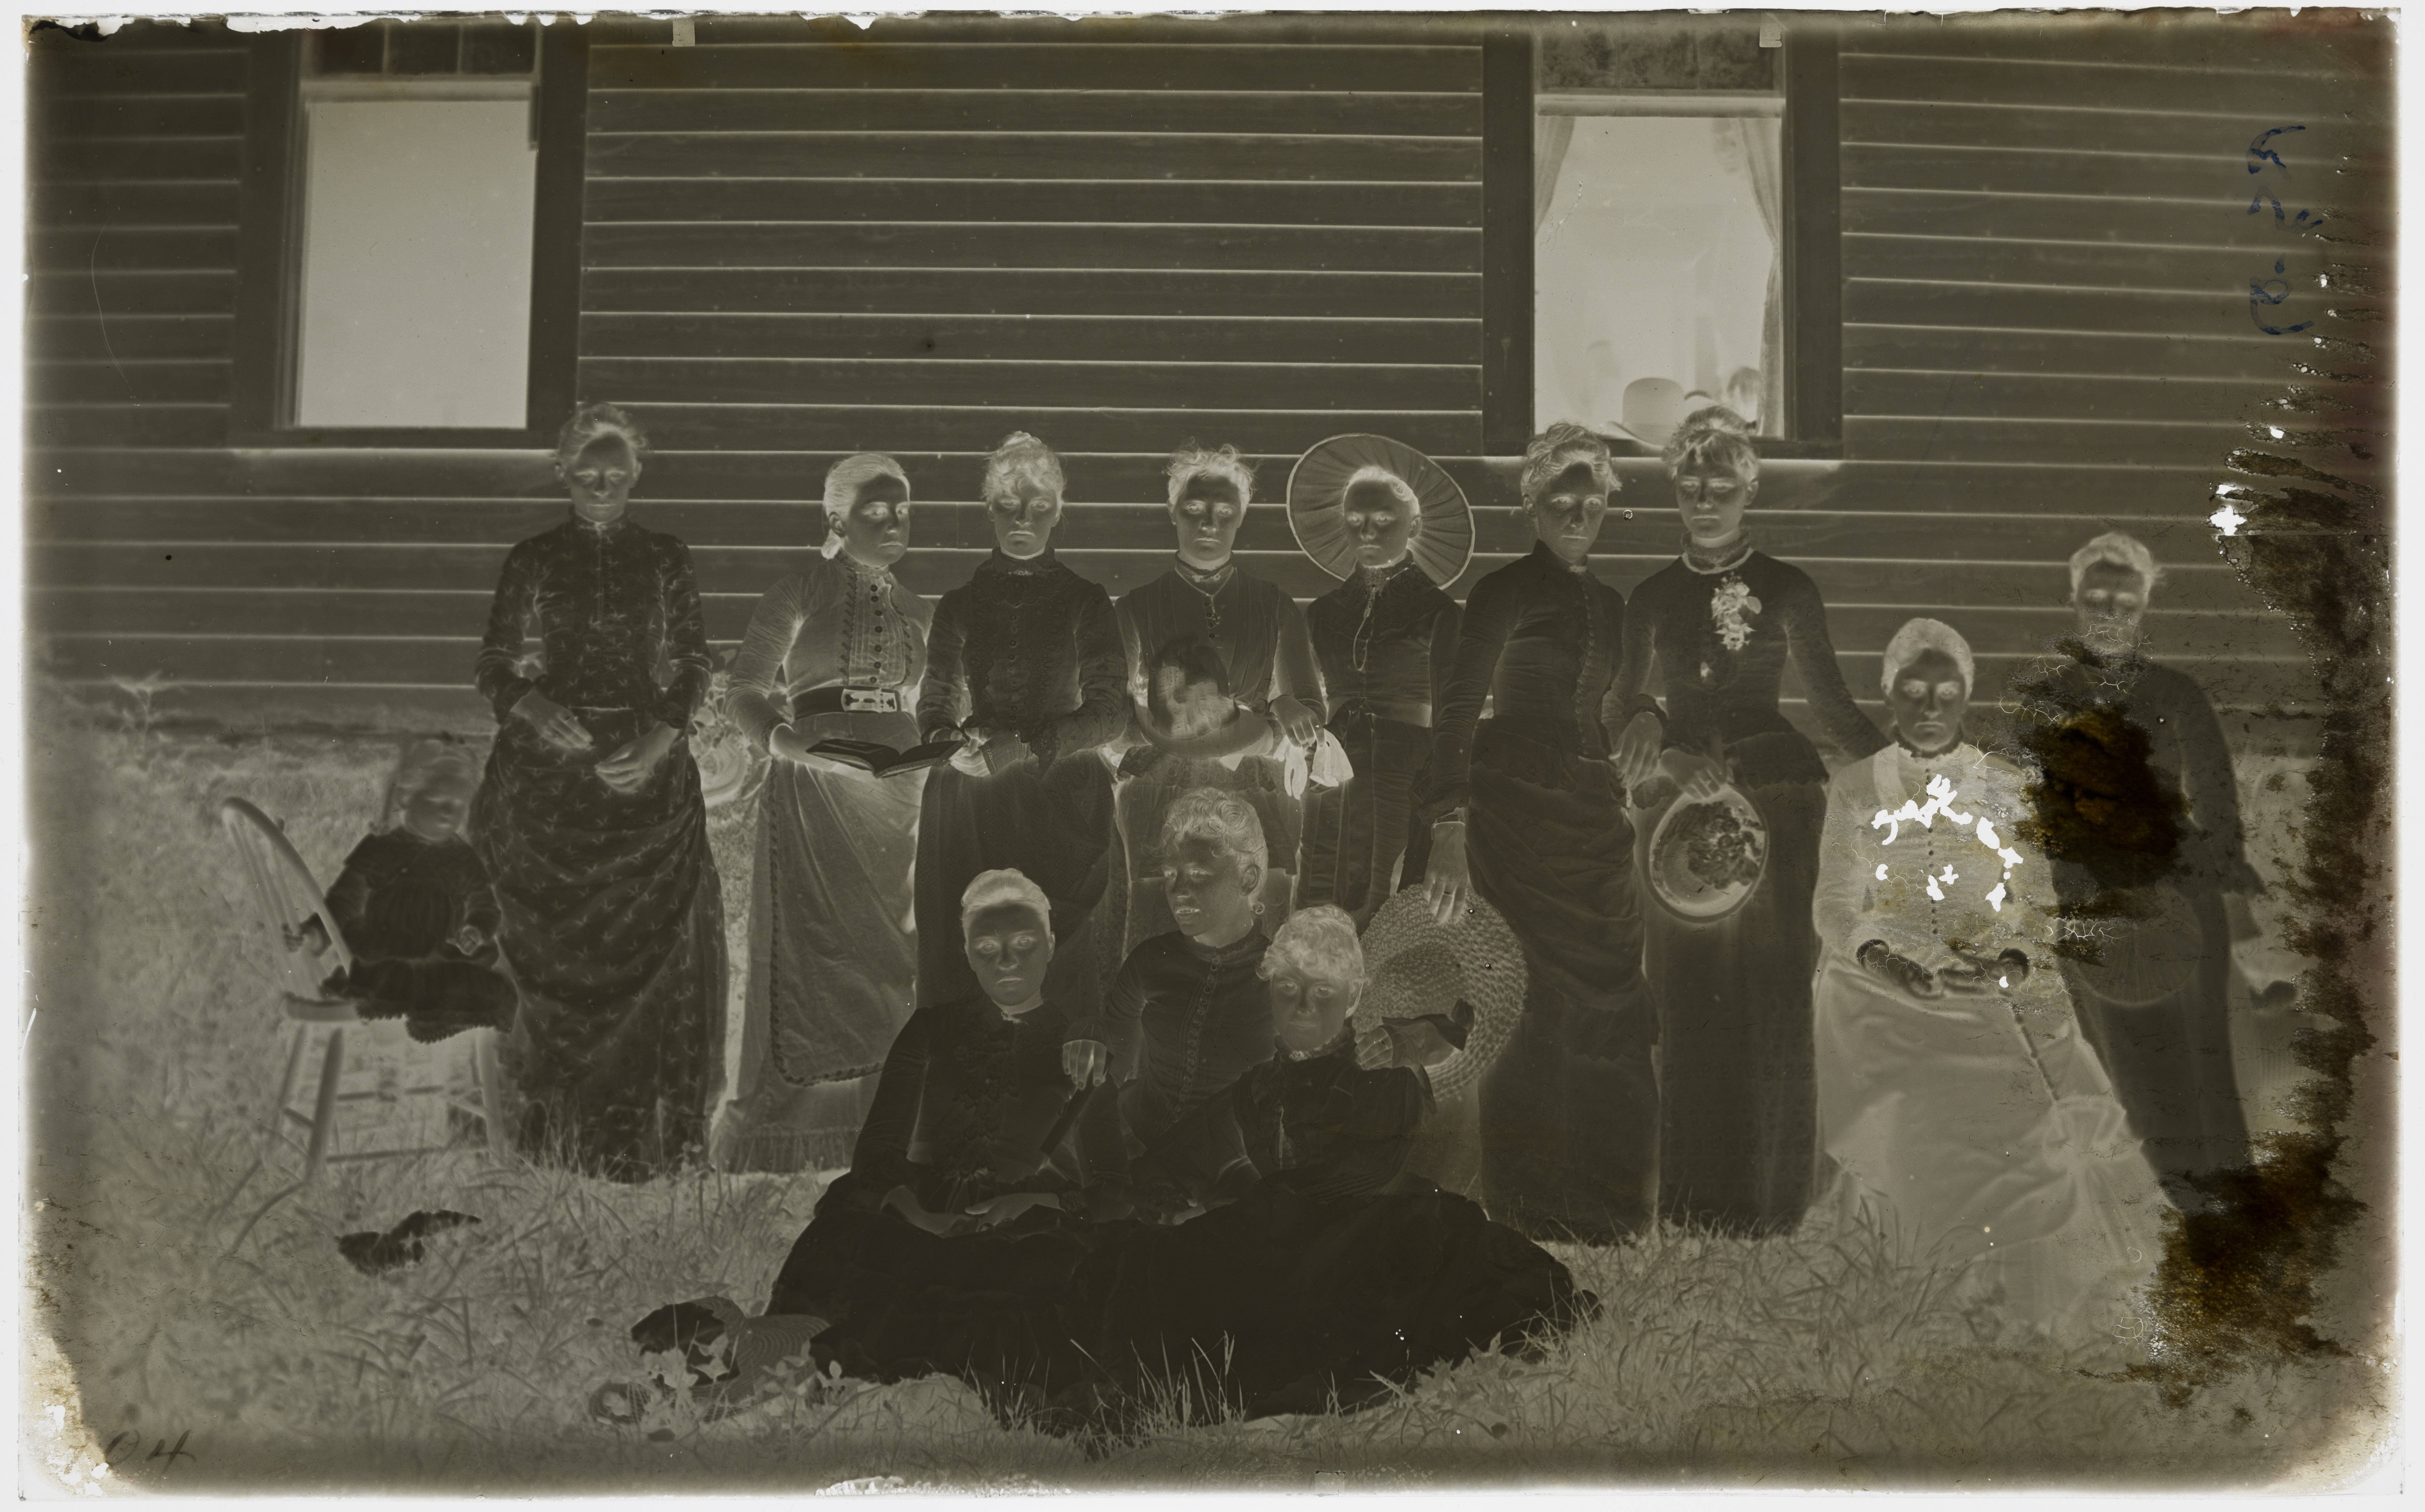 A glass plate negative of a group portrait by O.G. Felland.